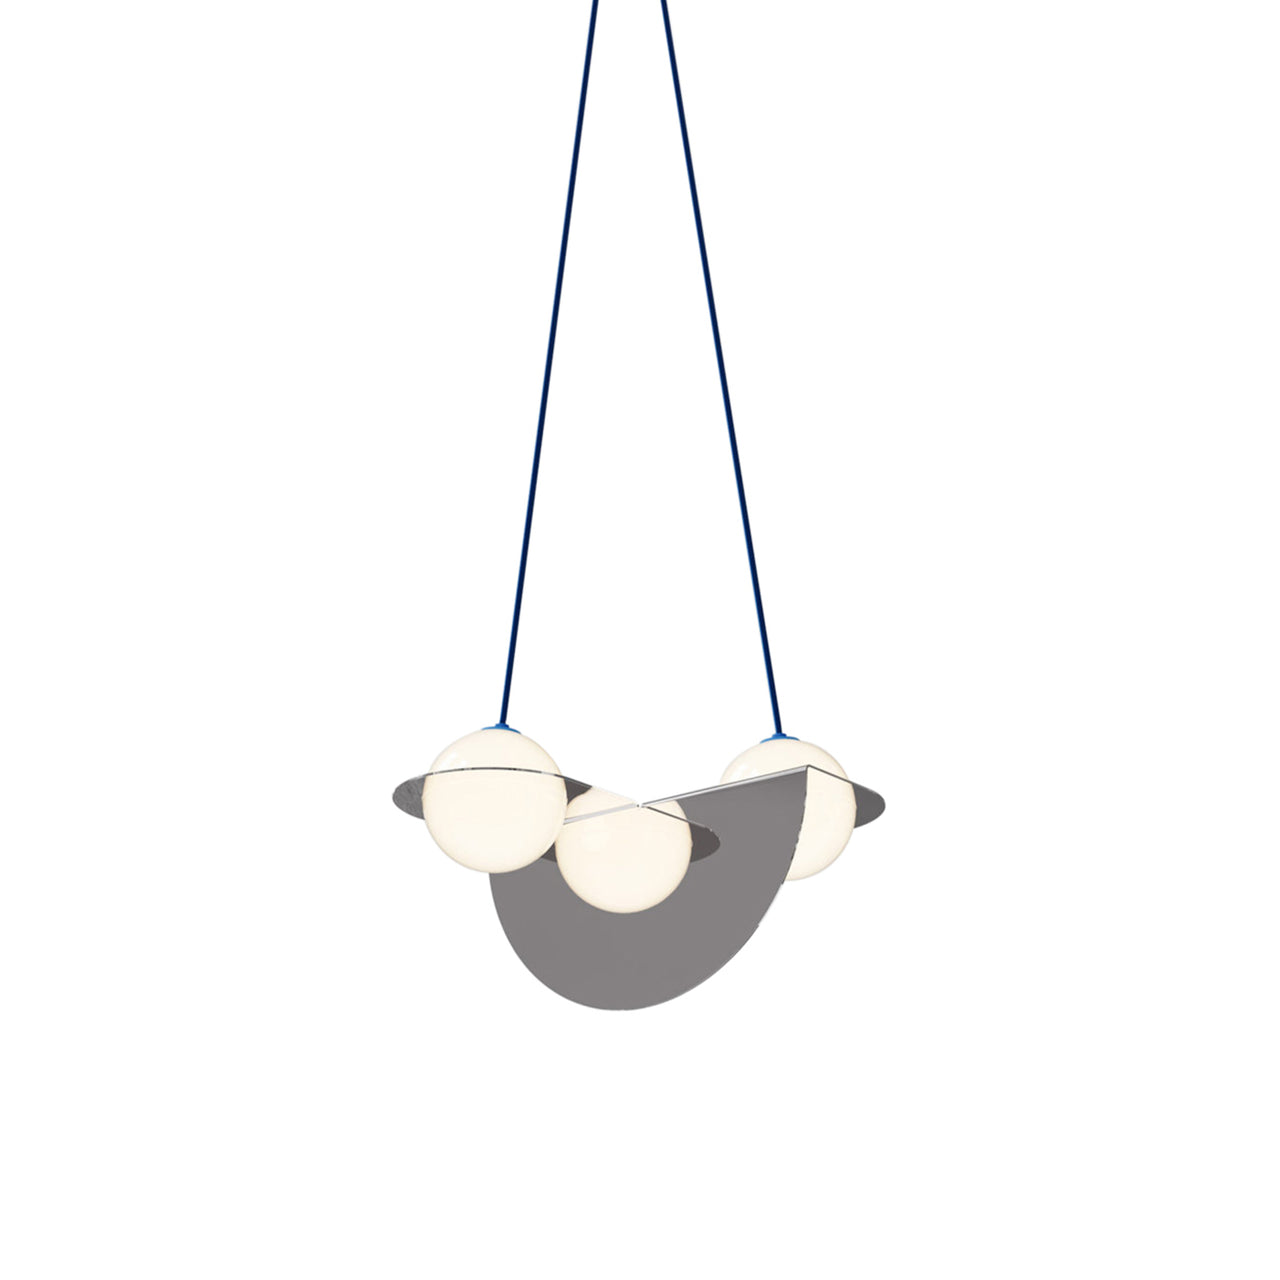 Laurent 01 Suspension Lamp: Nickel Plated + Blue + Angled Wires